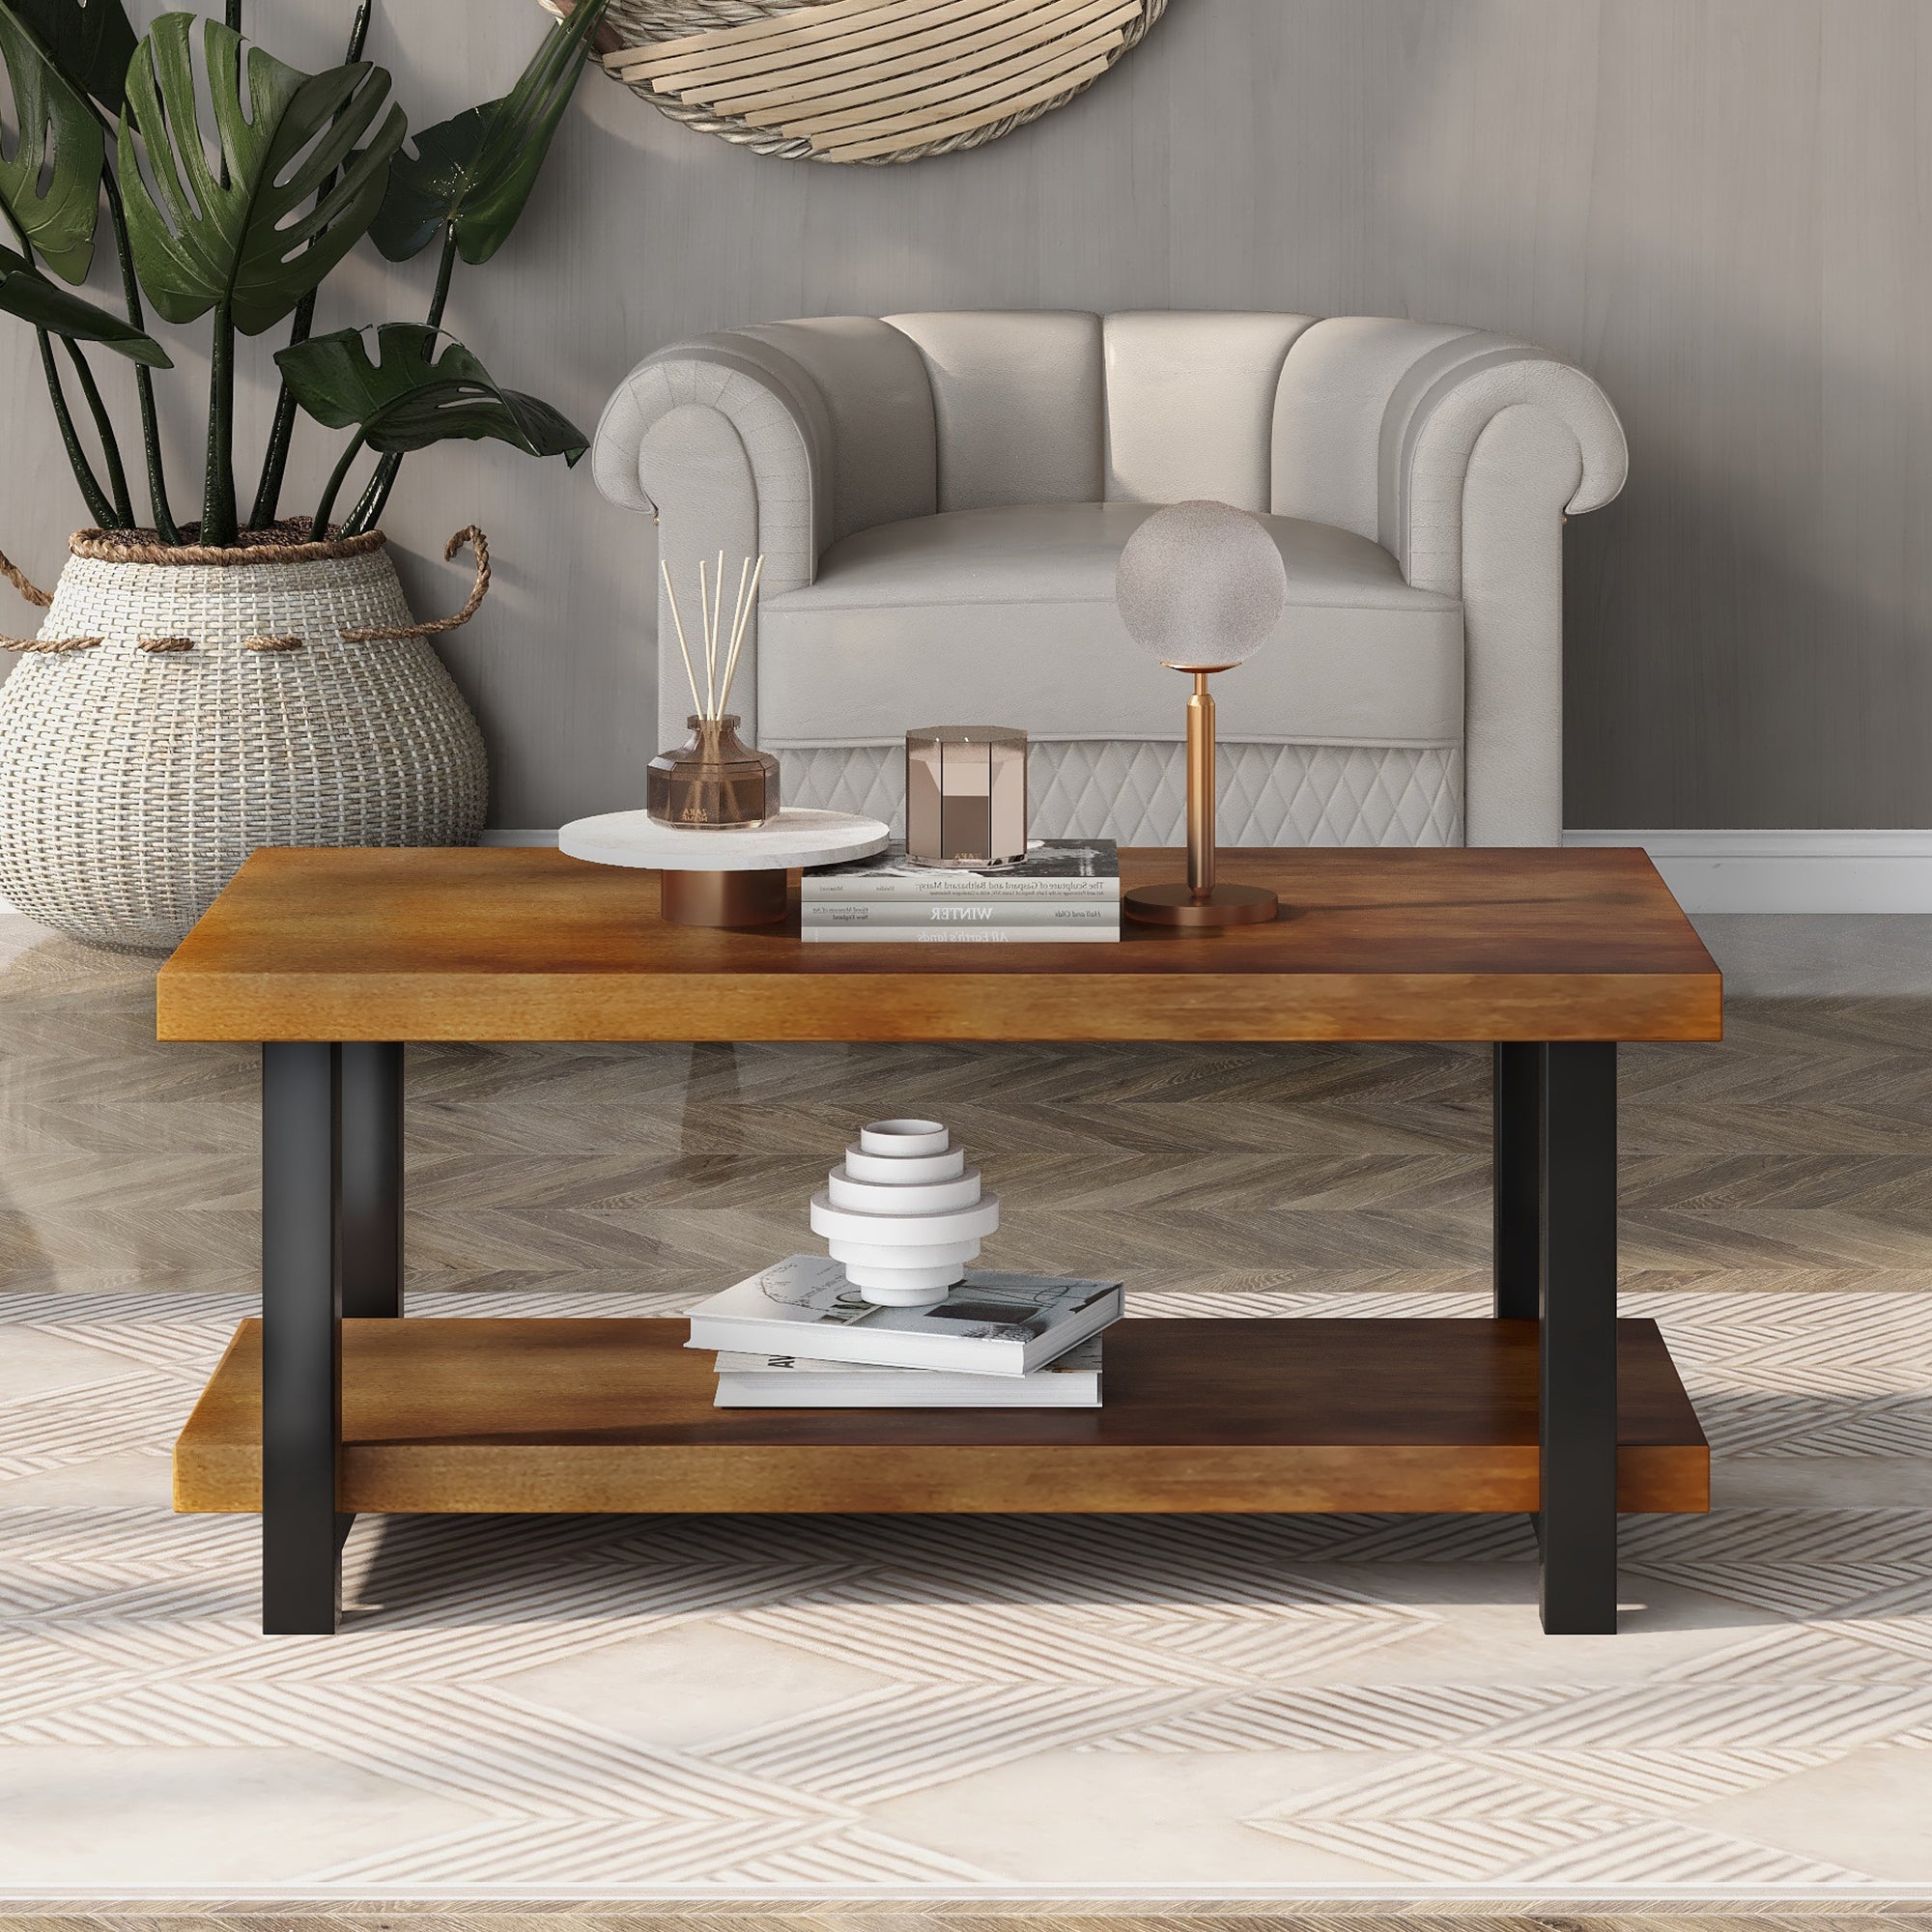 TREXM Rustic Natural Coffee Table (Brown)